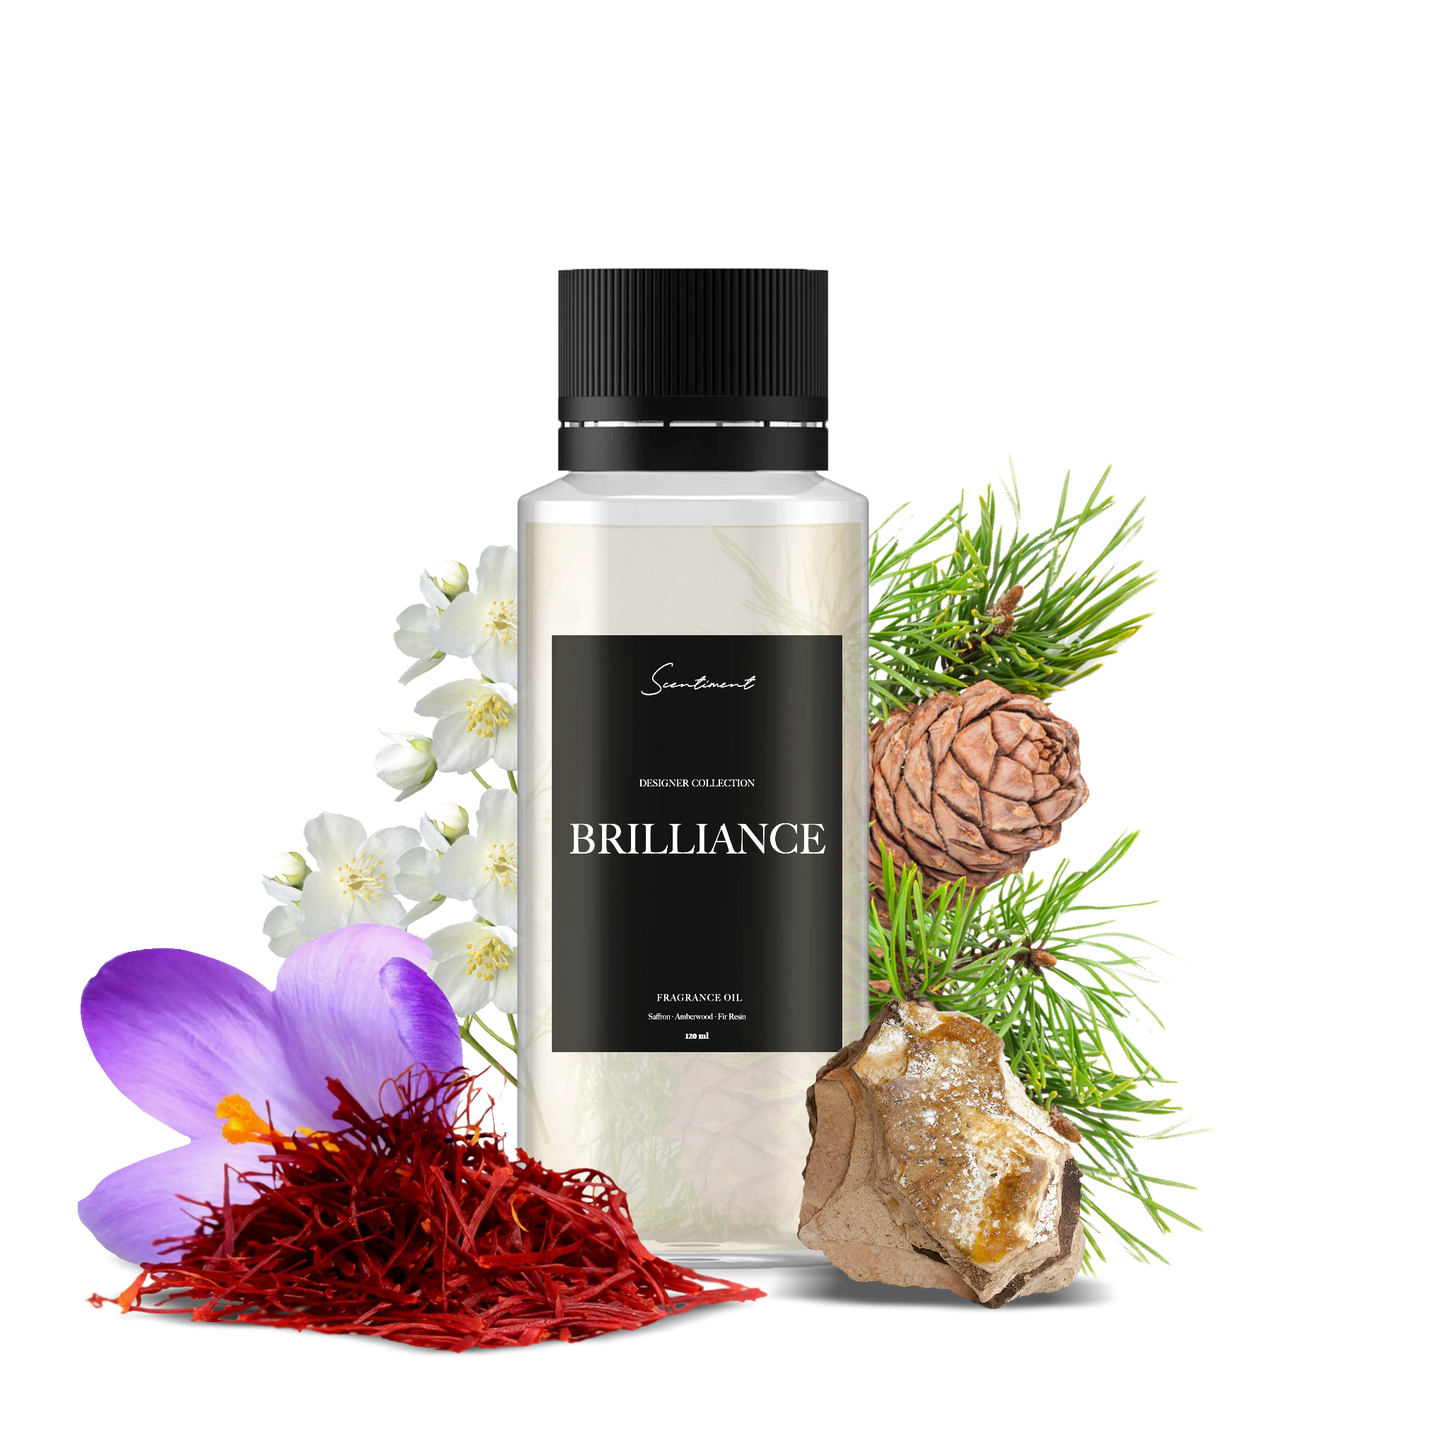 Brilliance Fragrance Oil, inspired by Baccarat Rouge 540® with notes of Saffron, Amberwood, and Fir Resin.